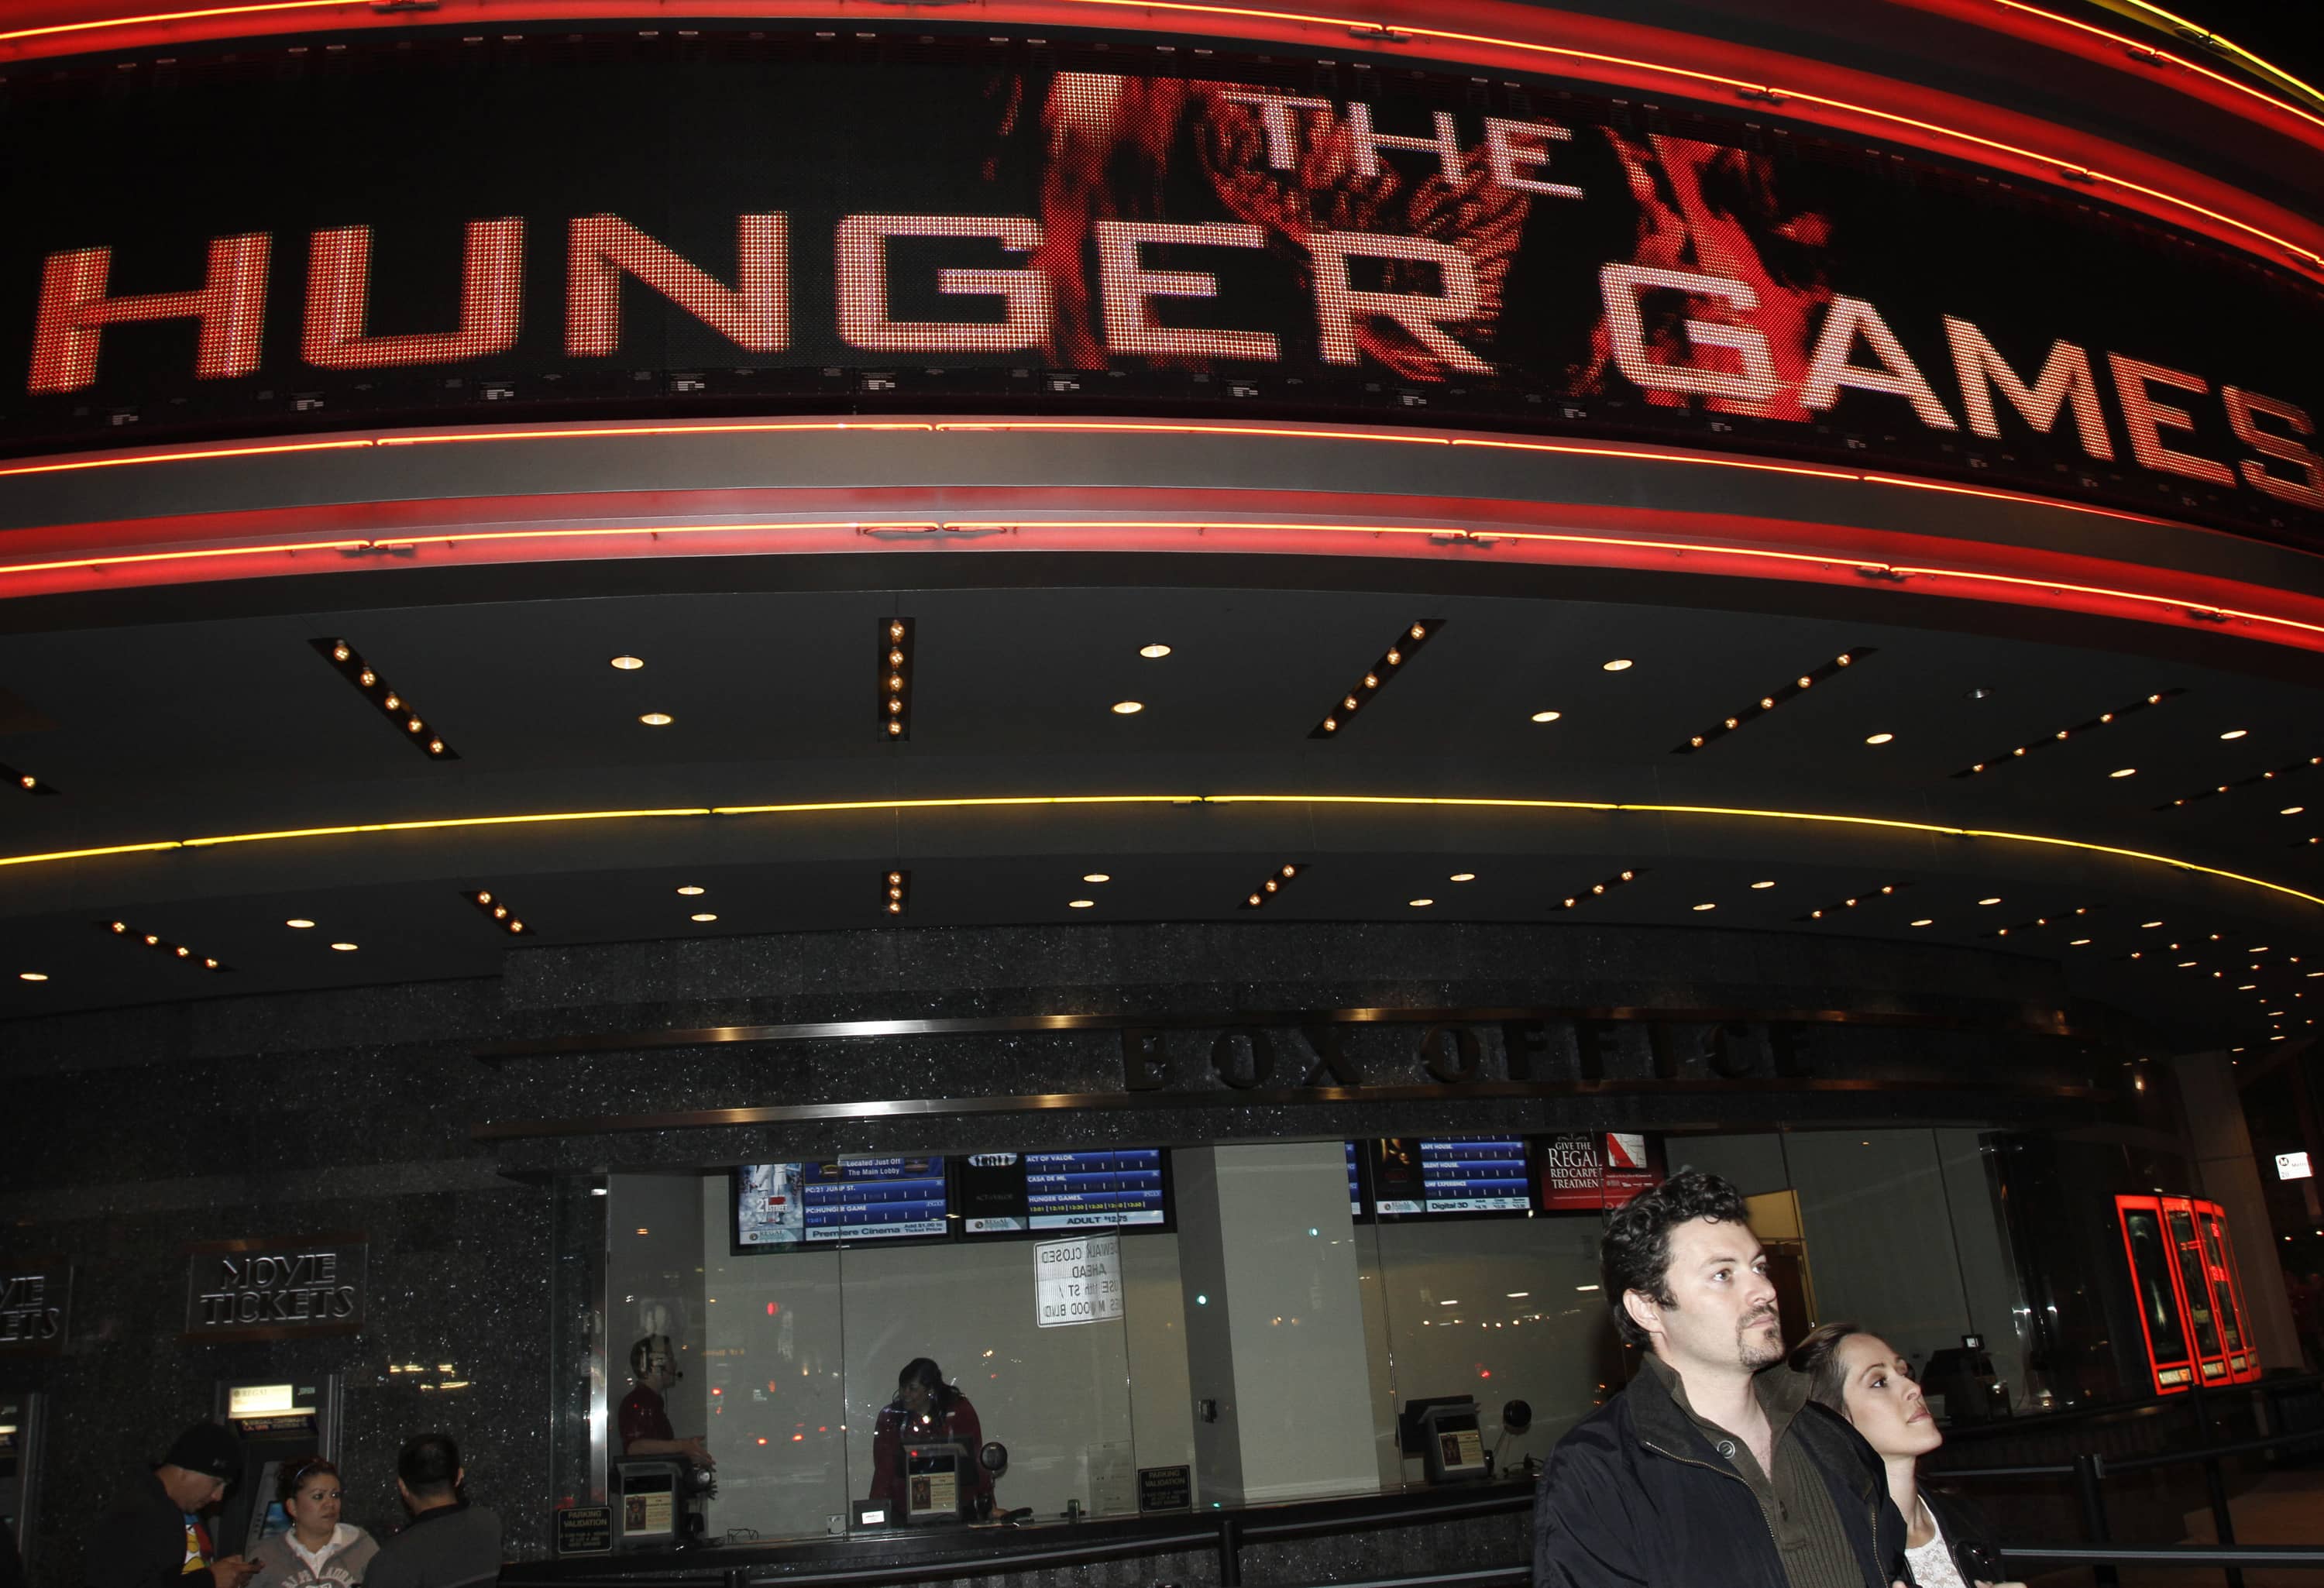 the-regal-cinemas-is-seen-during-the-opening-night-of-the-hunger-games-in-los-angeles